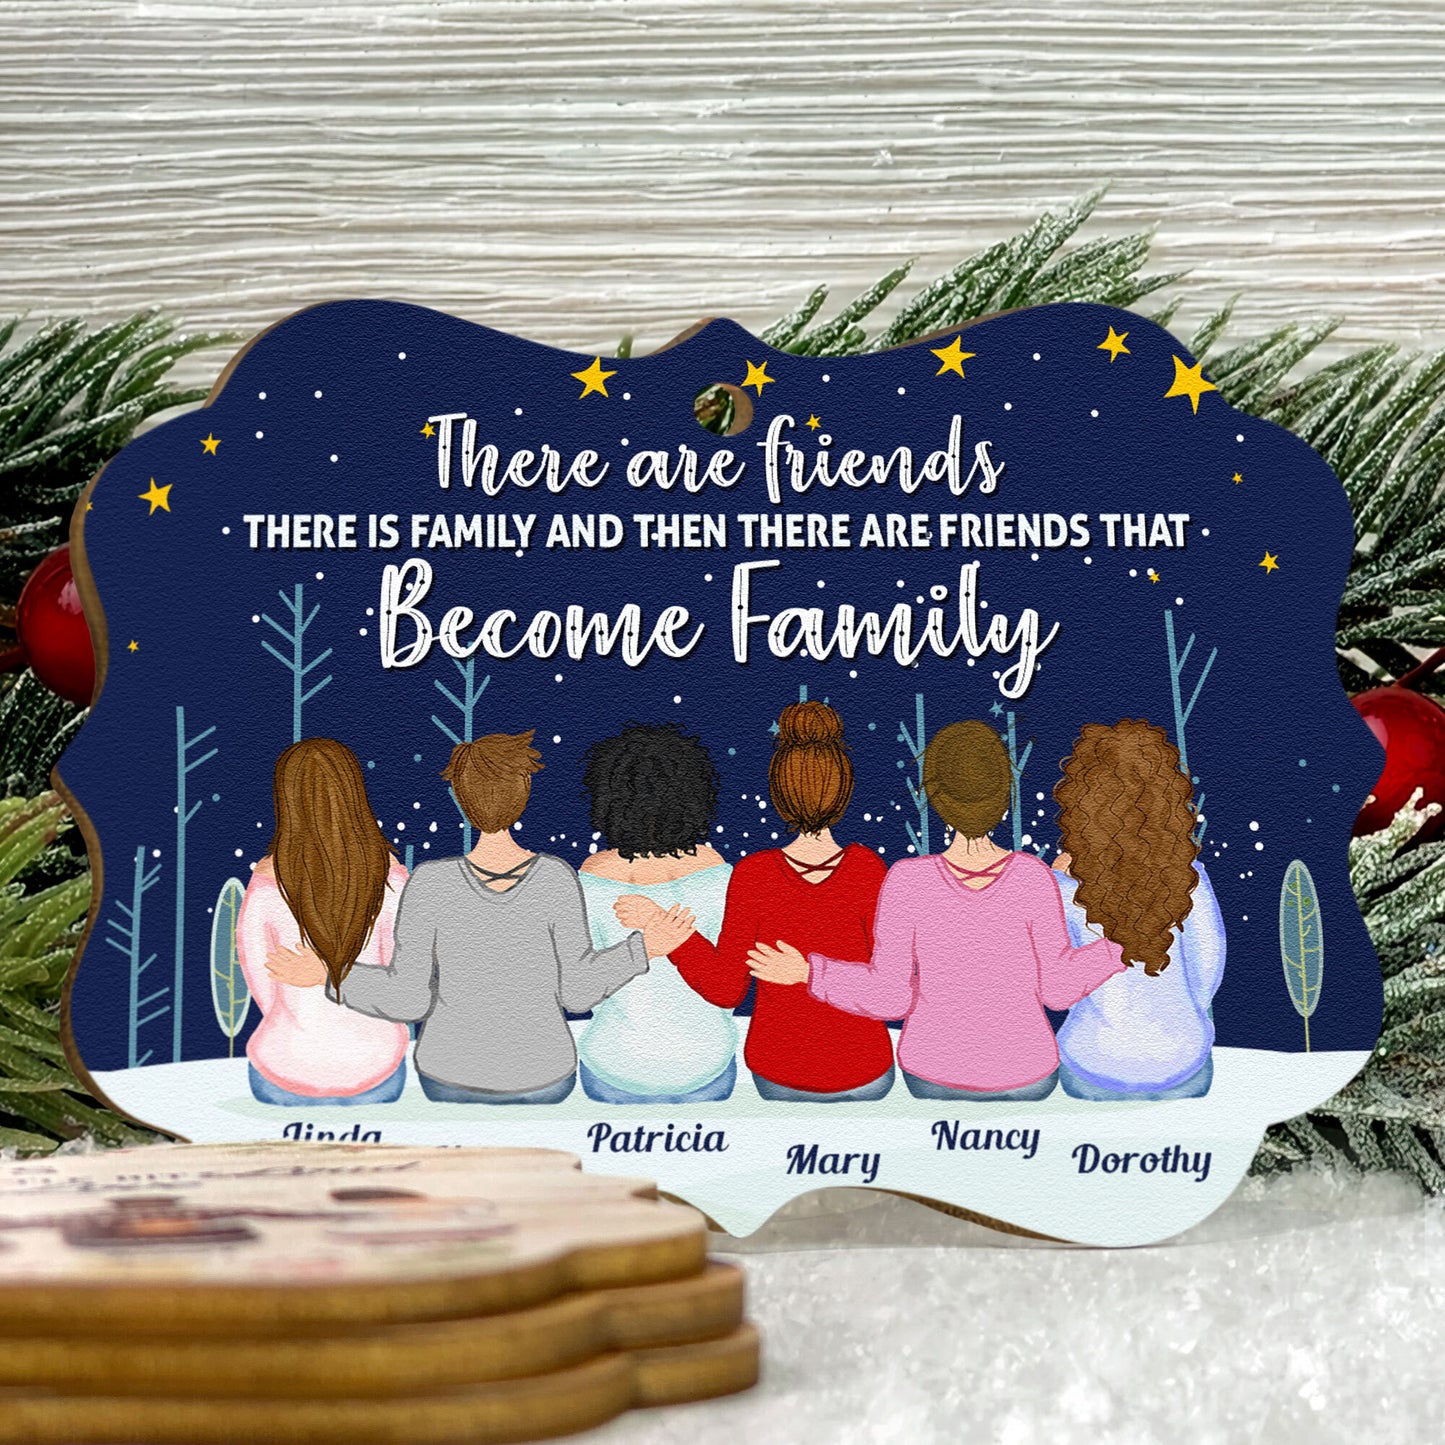 Life Is Better With Sisters - Personalized Wooden/Aluminum Ornament - Christmas Gift For Sisters, Besties